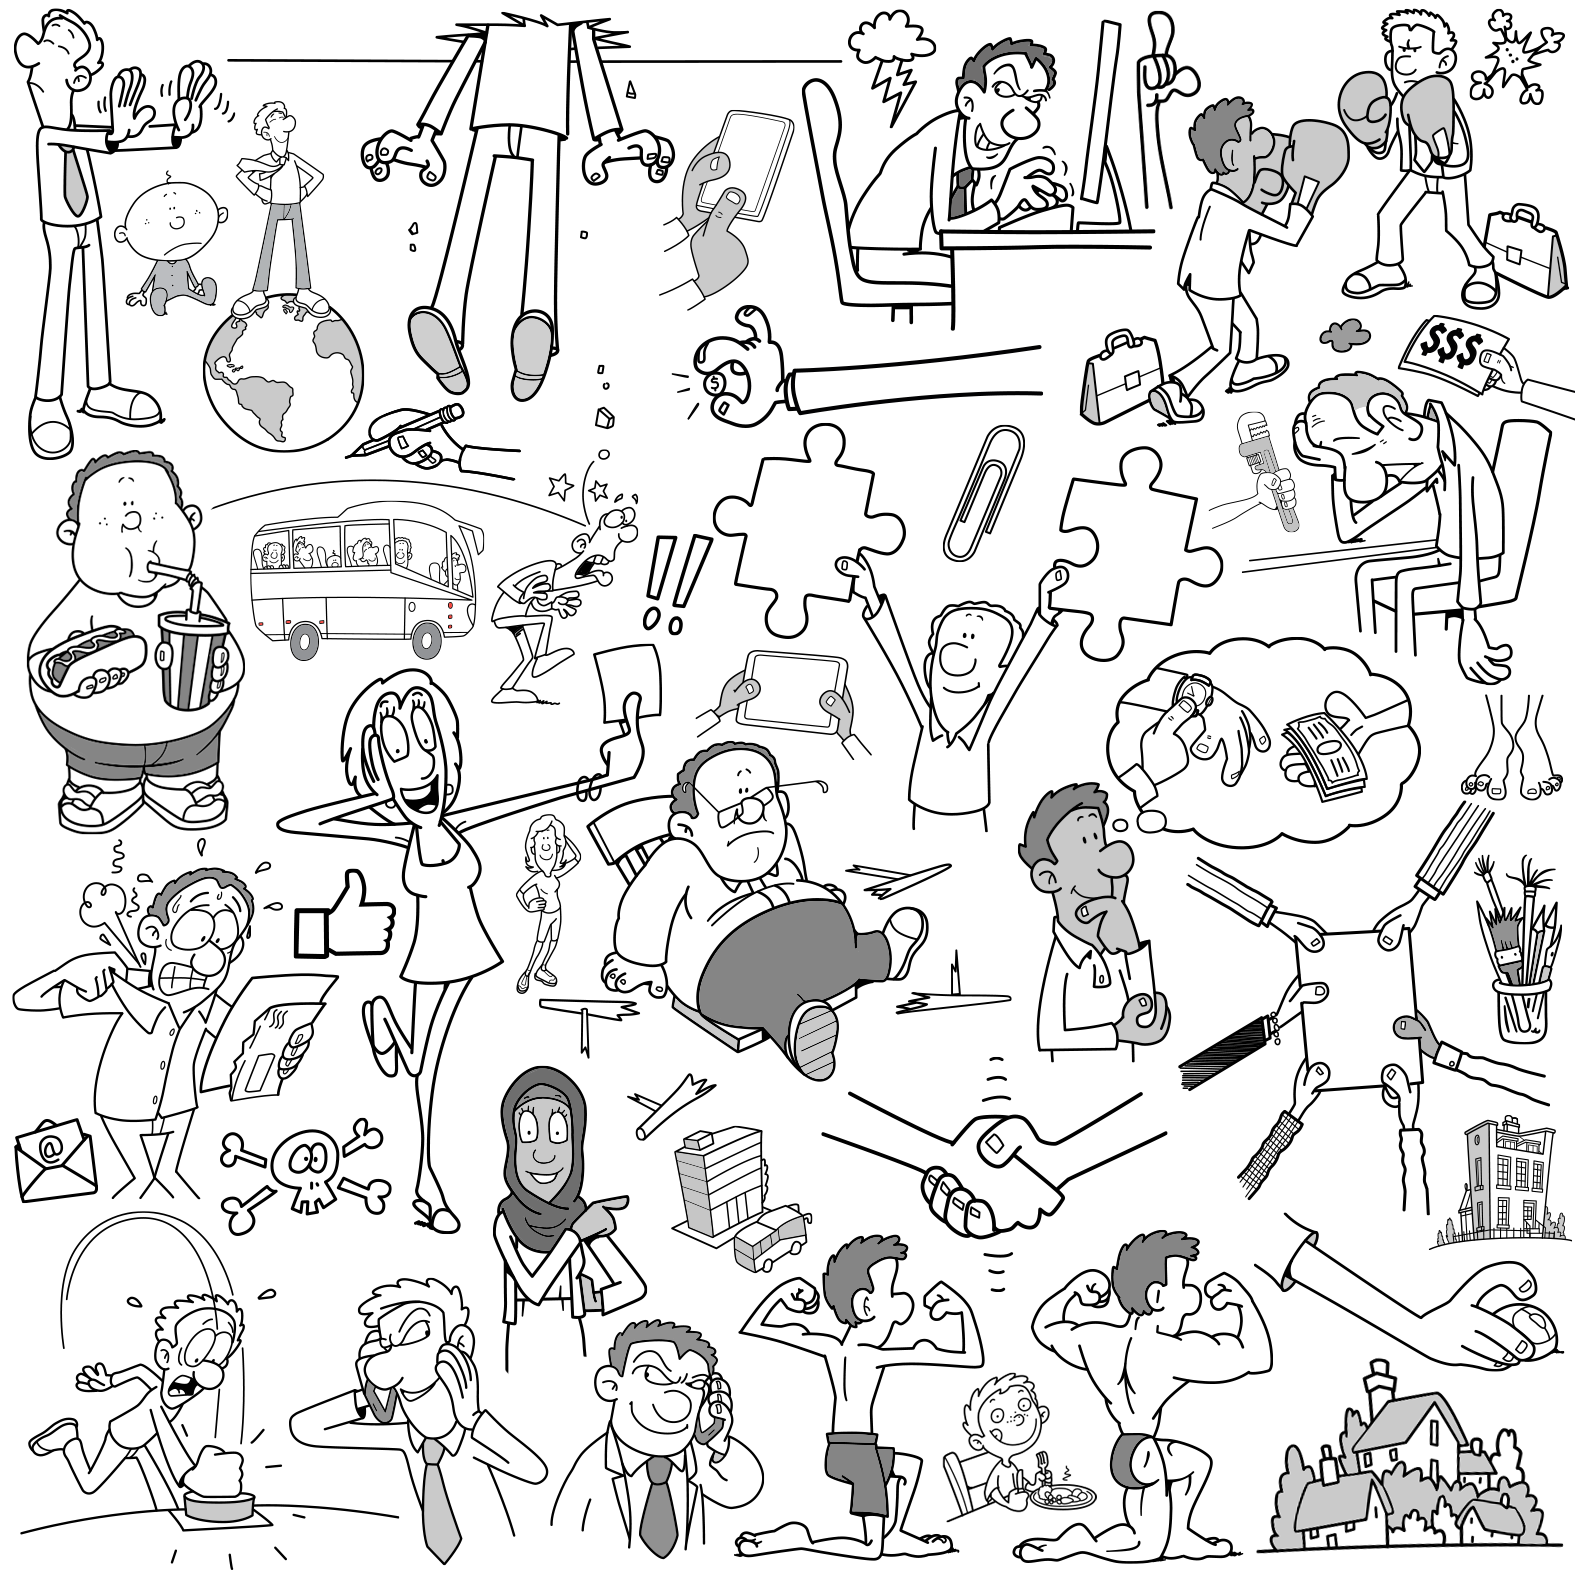 Download Svg Doodle Whiteboard Animation Cartoon Image Library